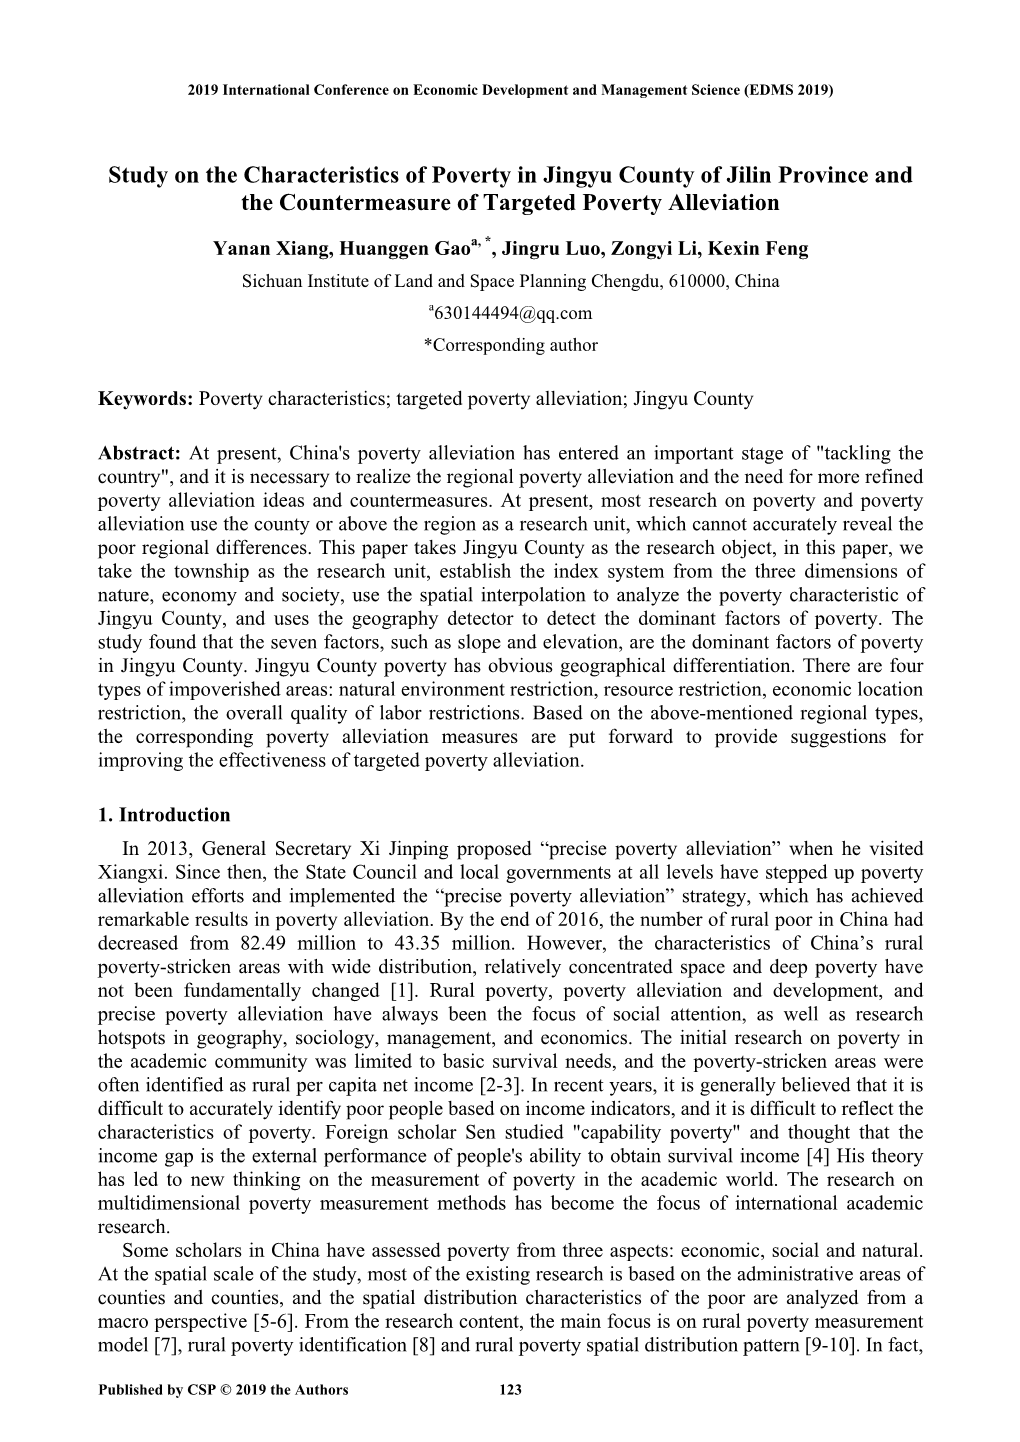 Study on the Characteristics of Poverty in Jingyu County of Jilin Province and the Countermeasure of Targeted Poverty Alleviation